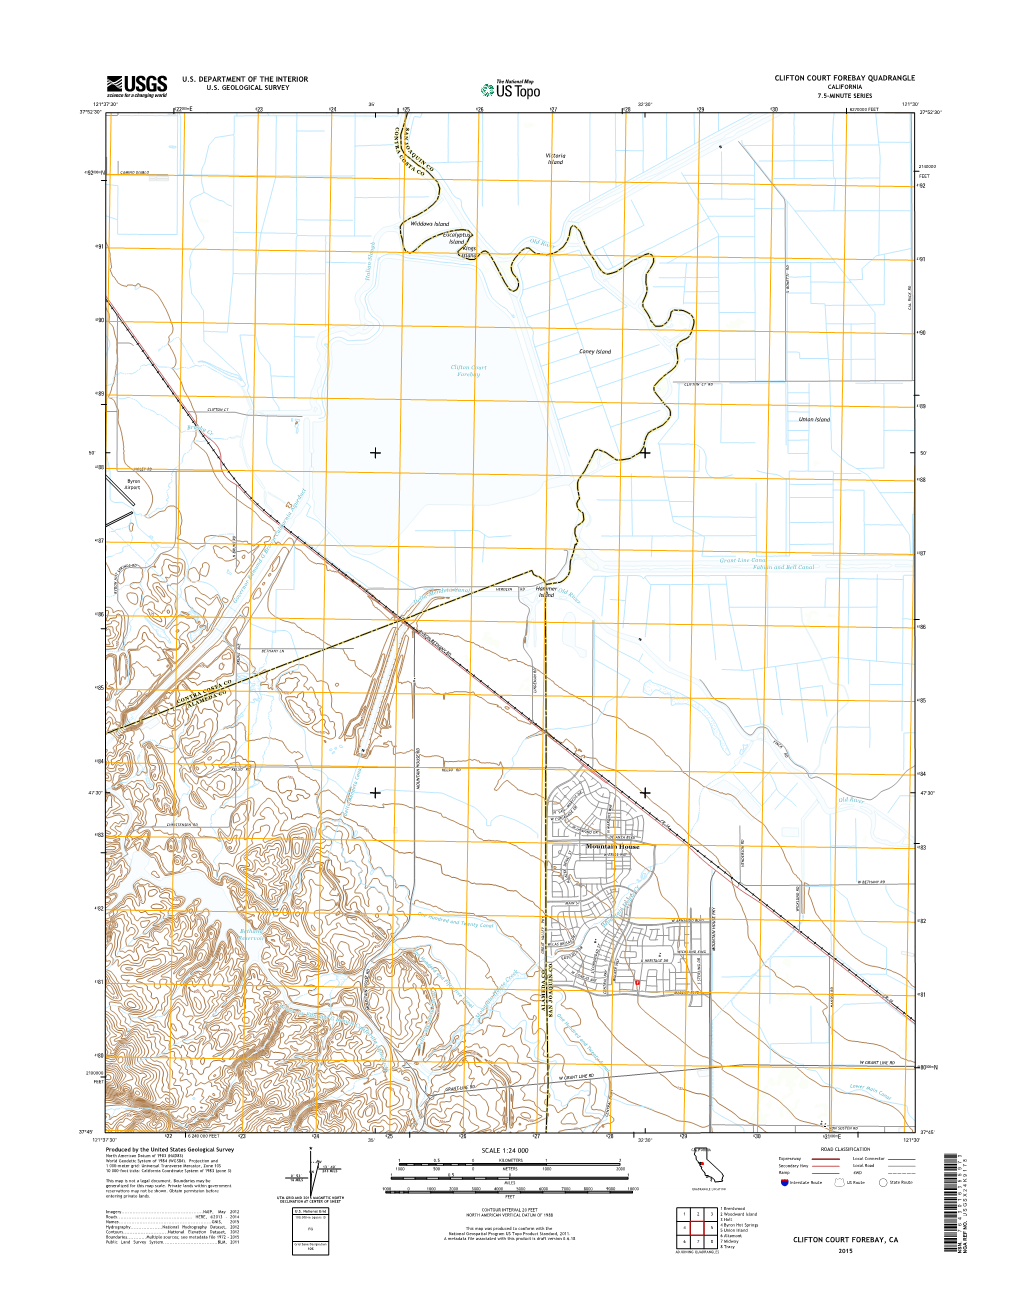 USGS 7.5-Minute Image Map for Clifton Court Forebay, California